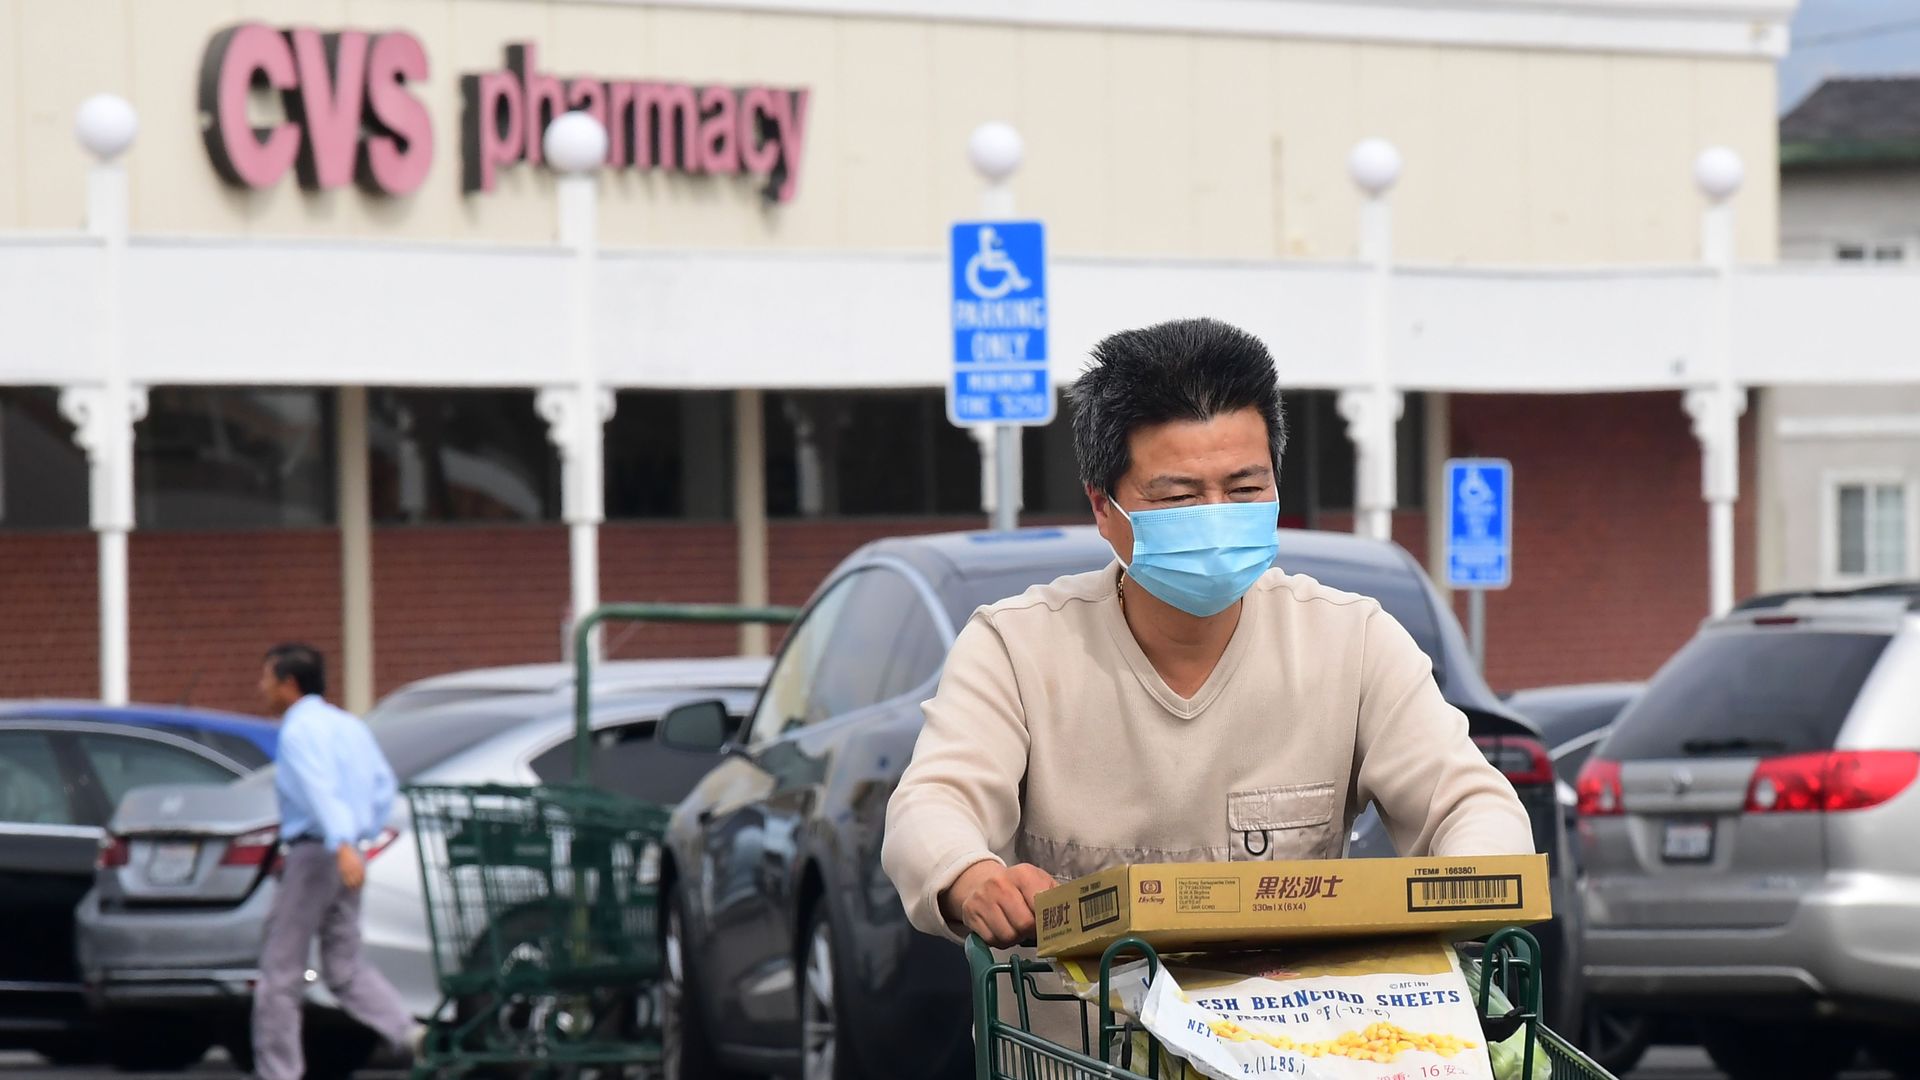 In this image, a man wearing a face mask pushes a shopping cart through a CVS parking lot